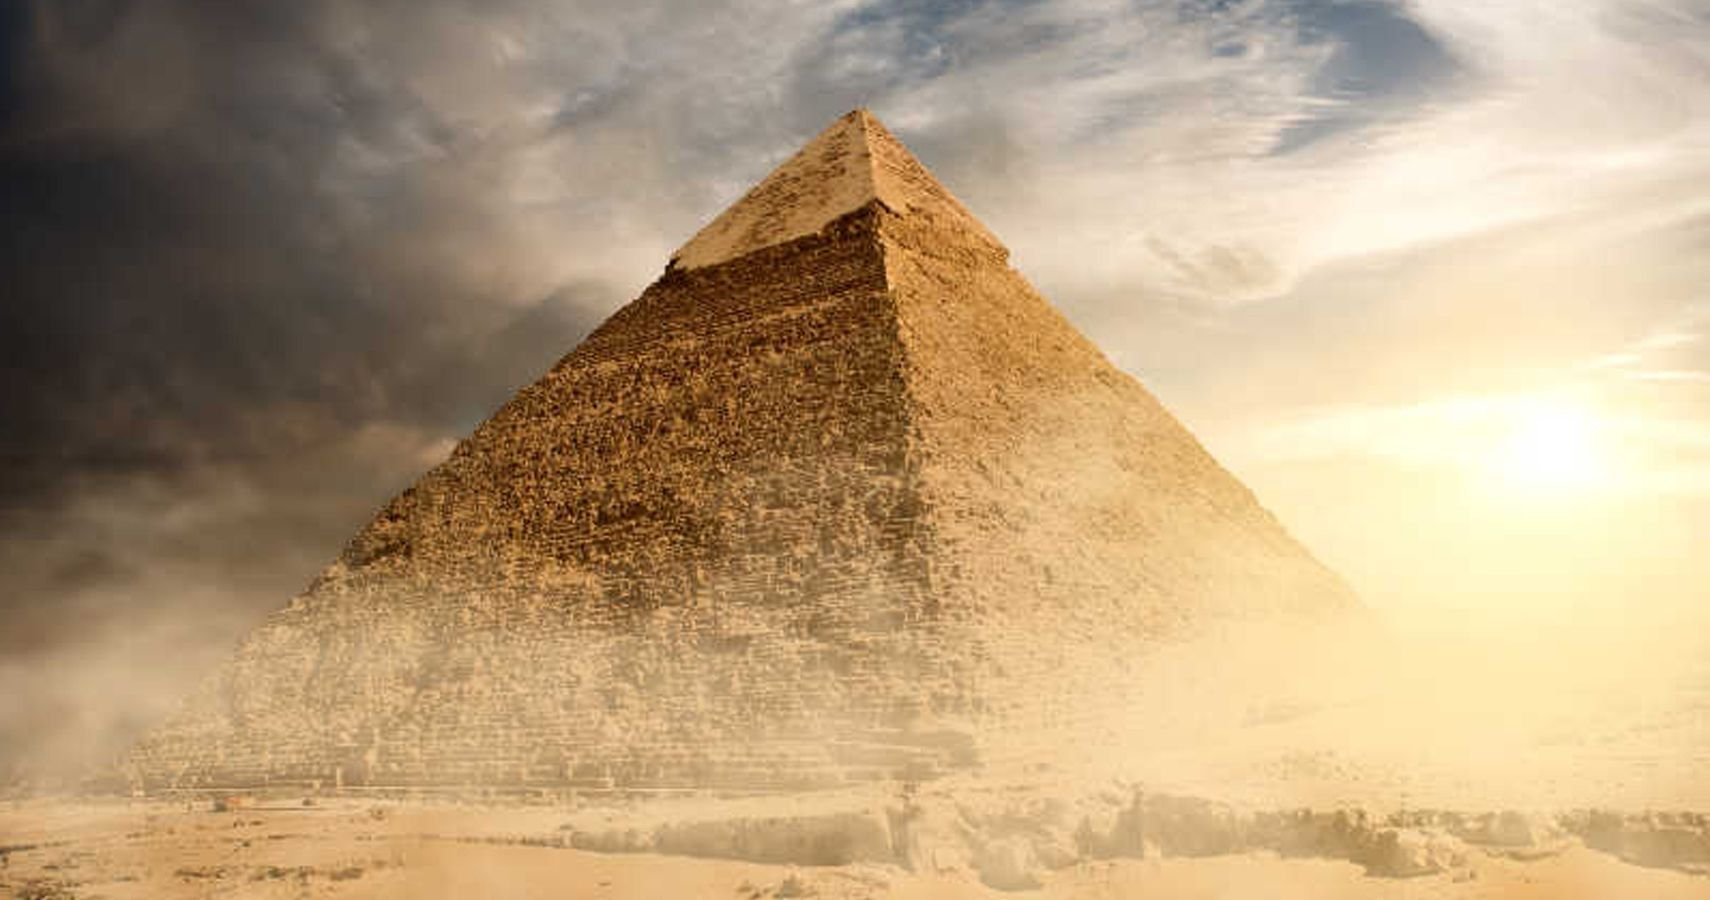 10 Things You Didn't Know About The Great Pyramid Of Giza